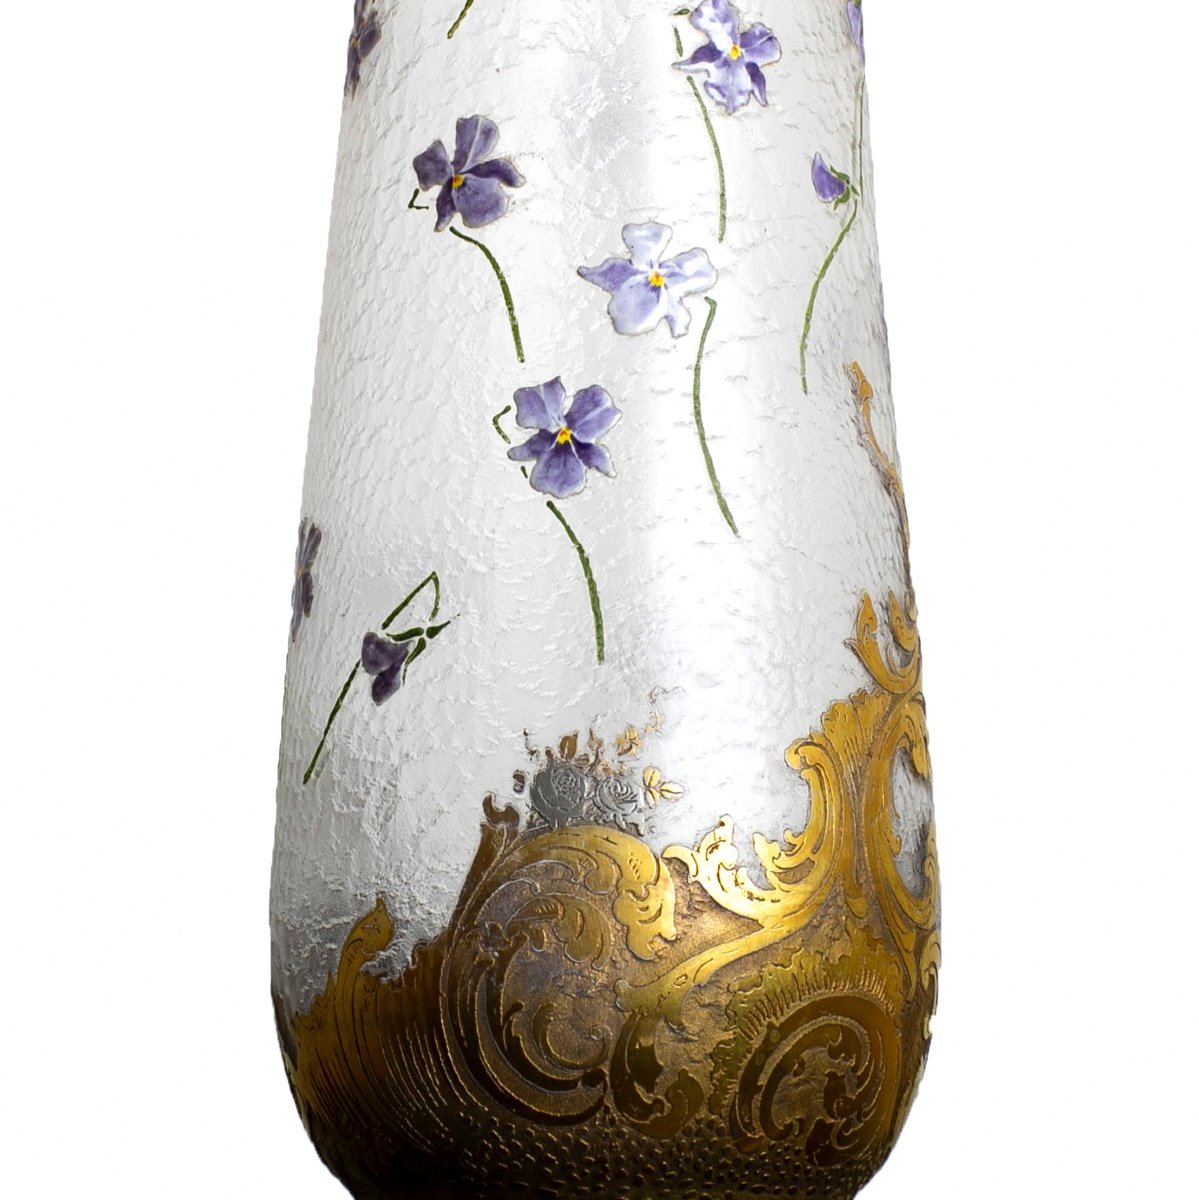 Pair Of Large Vases With Violets By Montjoye Legras 1900 - Art Nouveau-photo-2